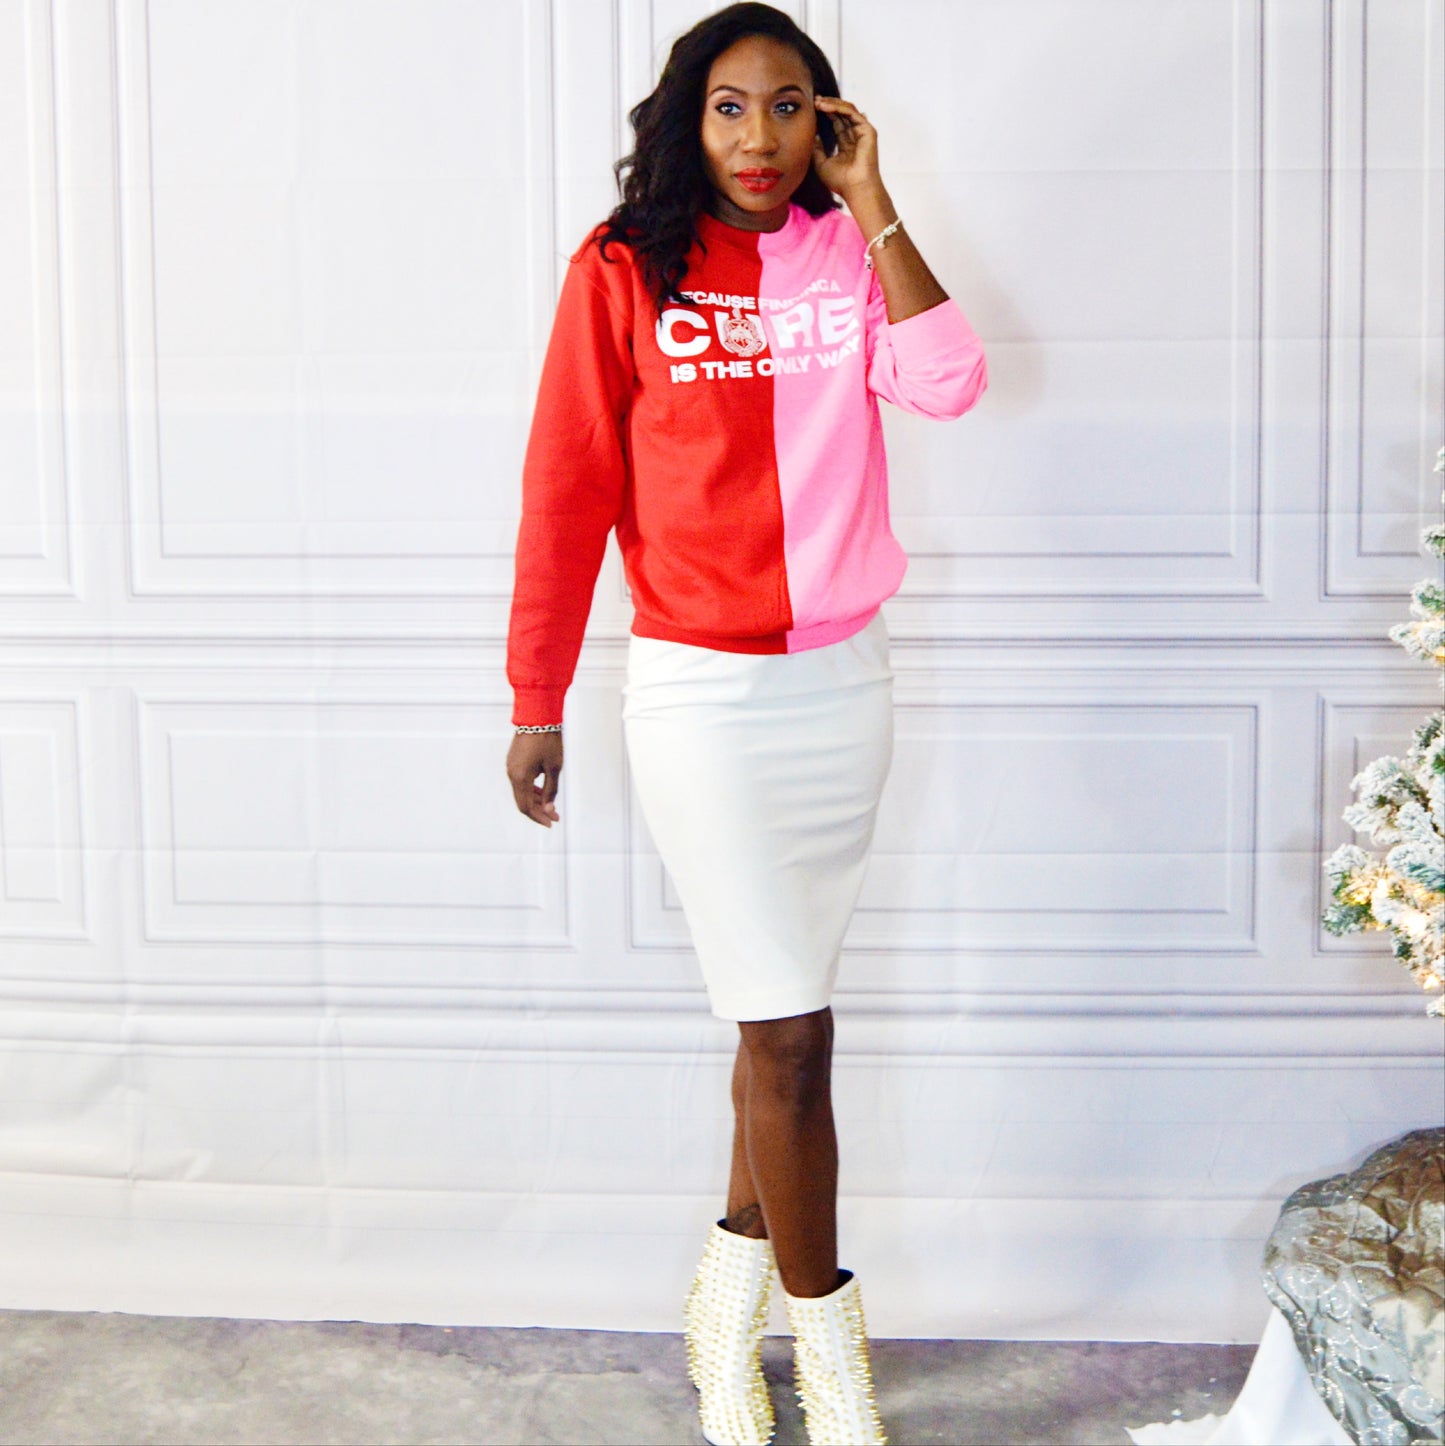 Only Way Cure Dst Sweatshirt | Free Shipping